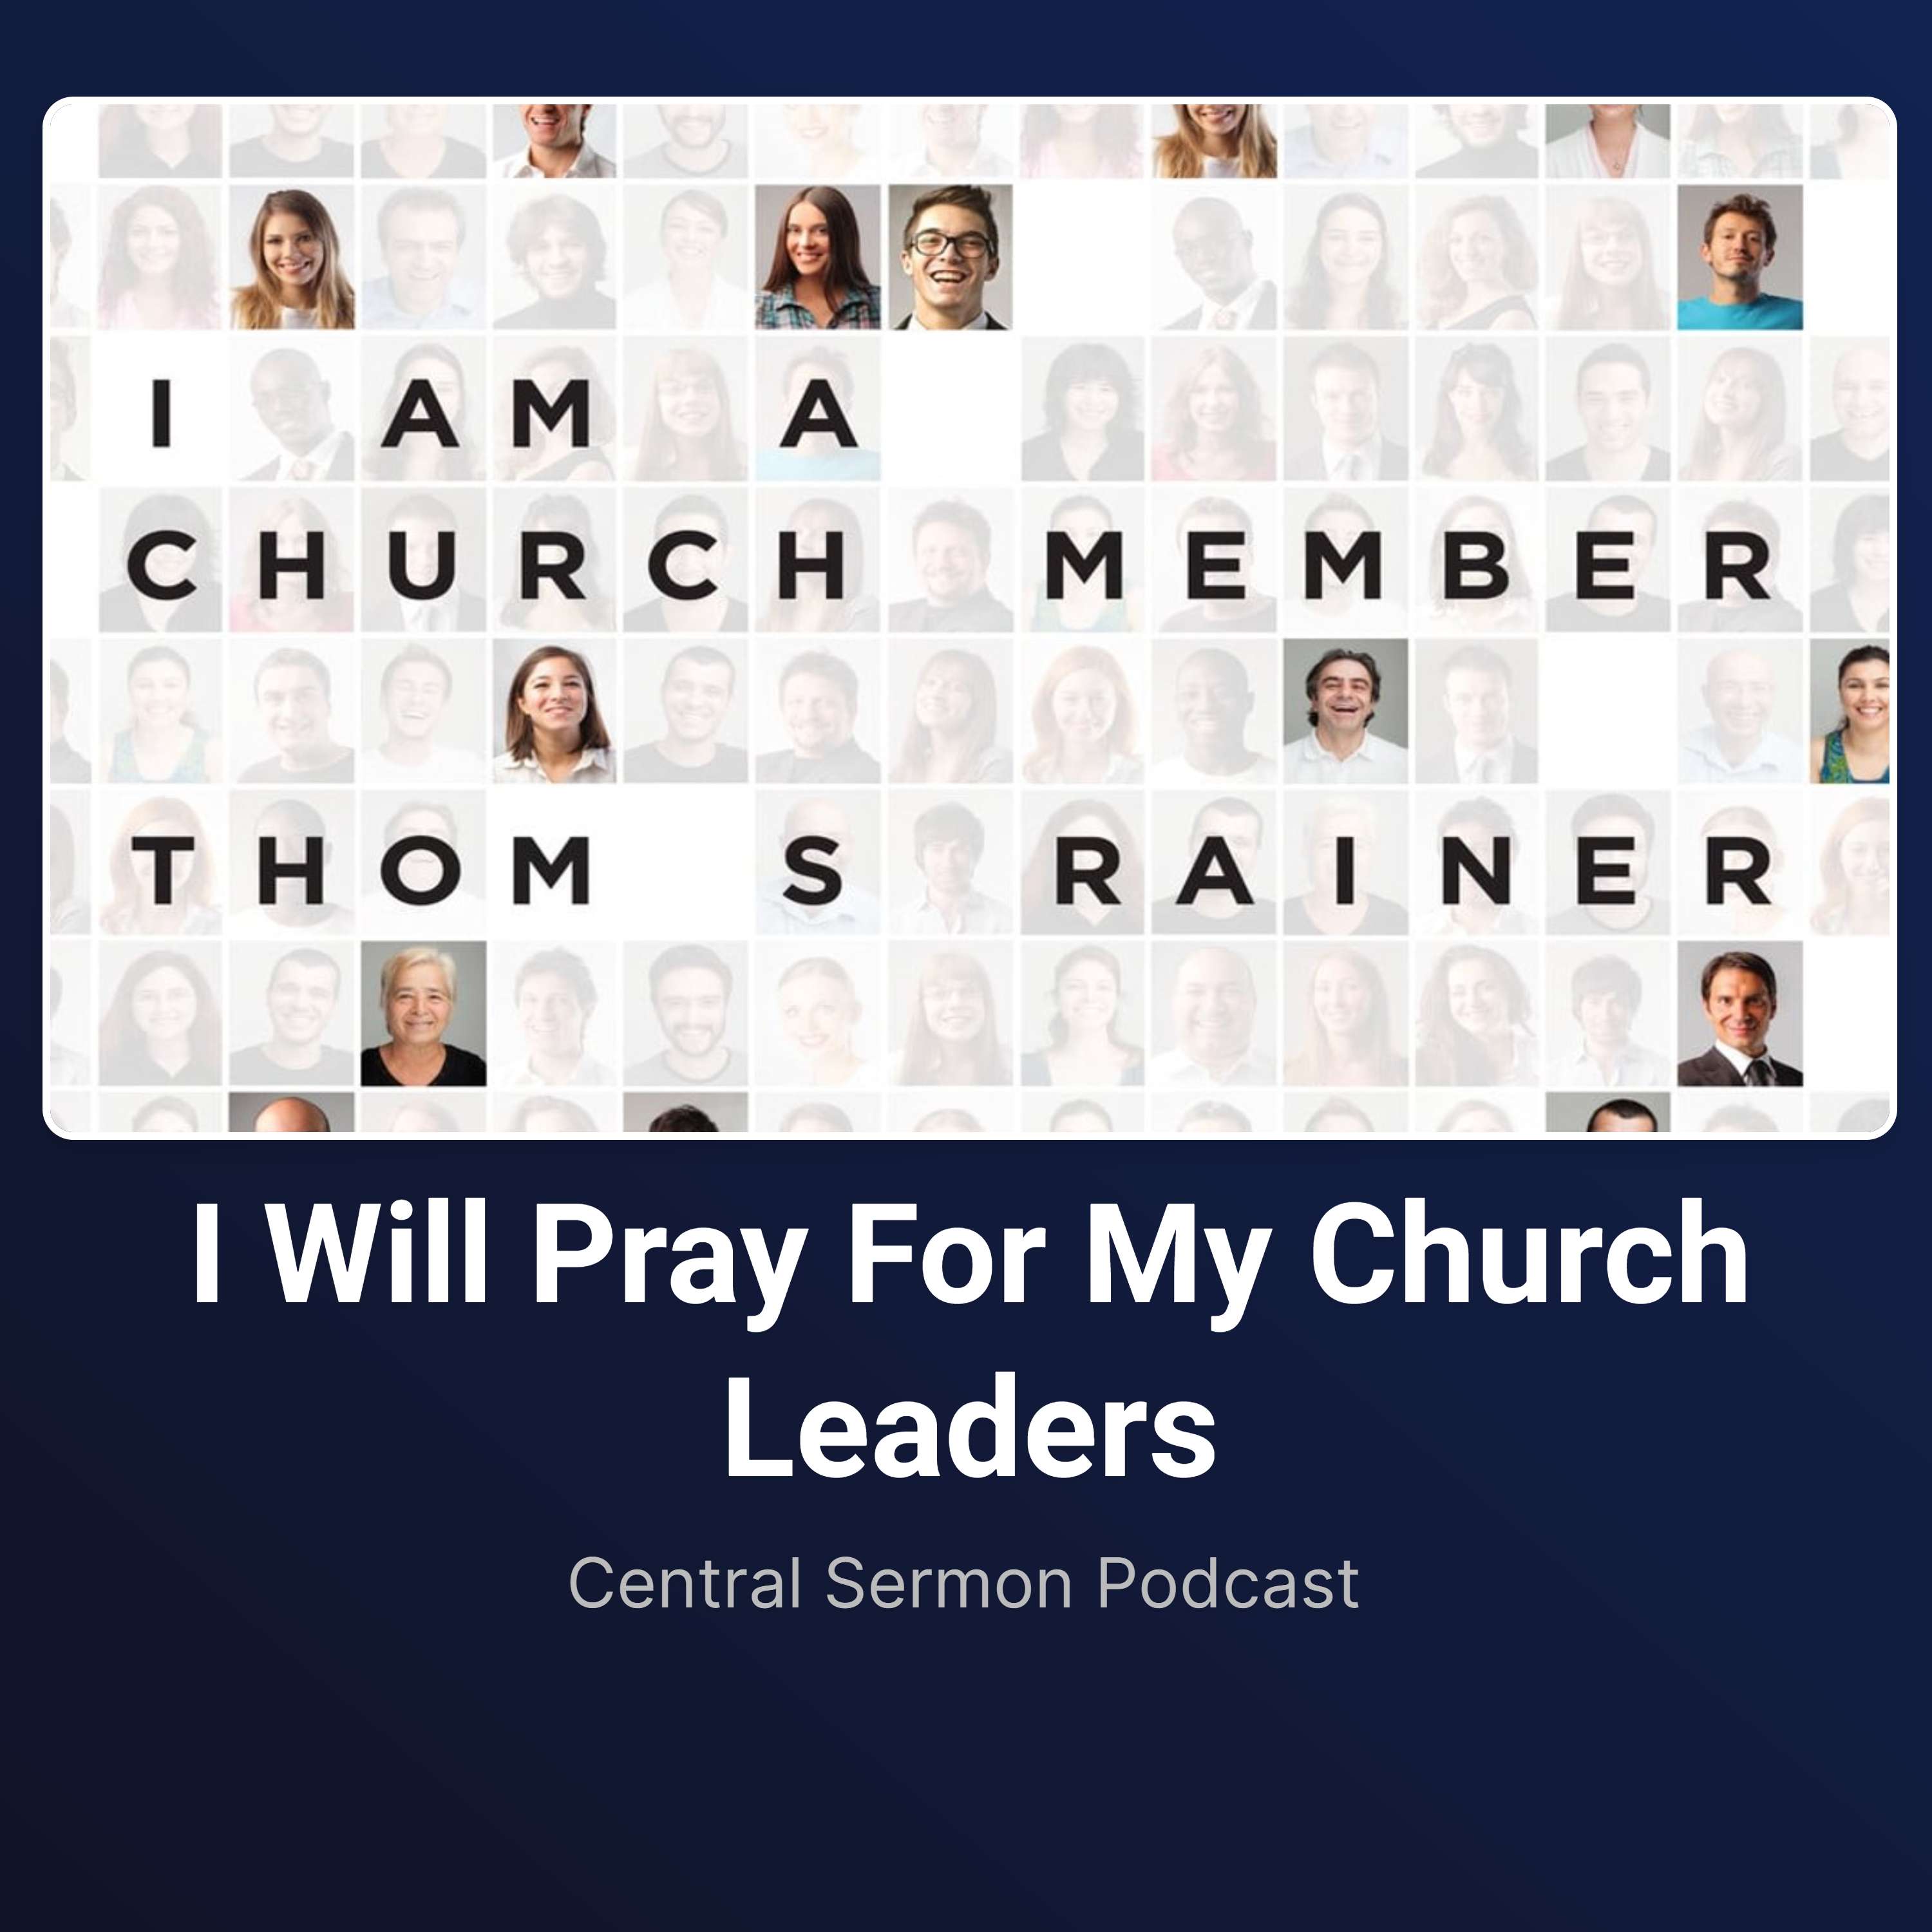 I Will Pray for My Church Leaders